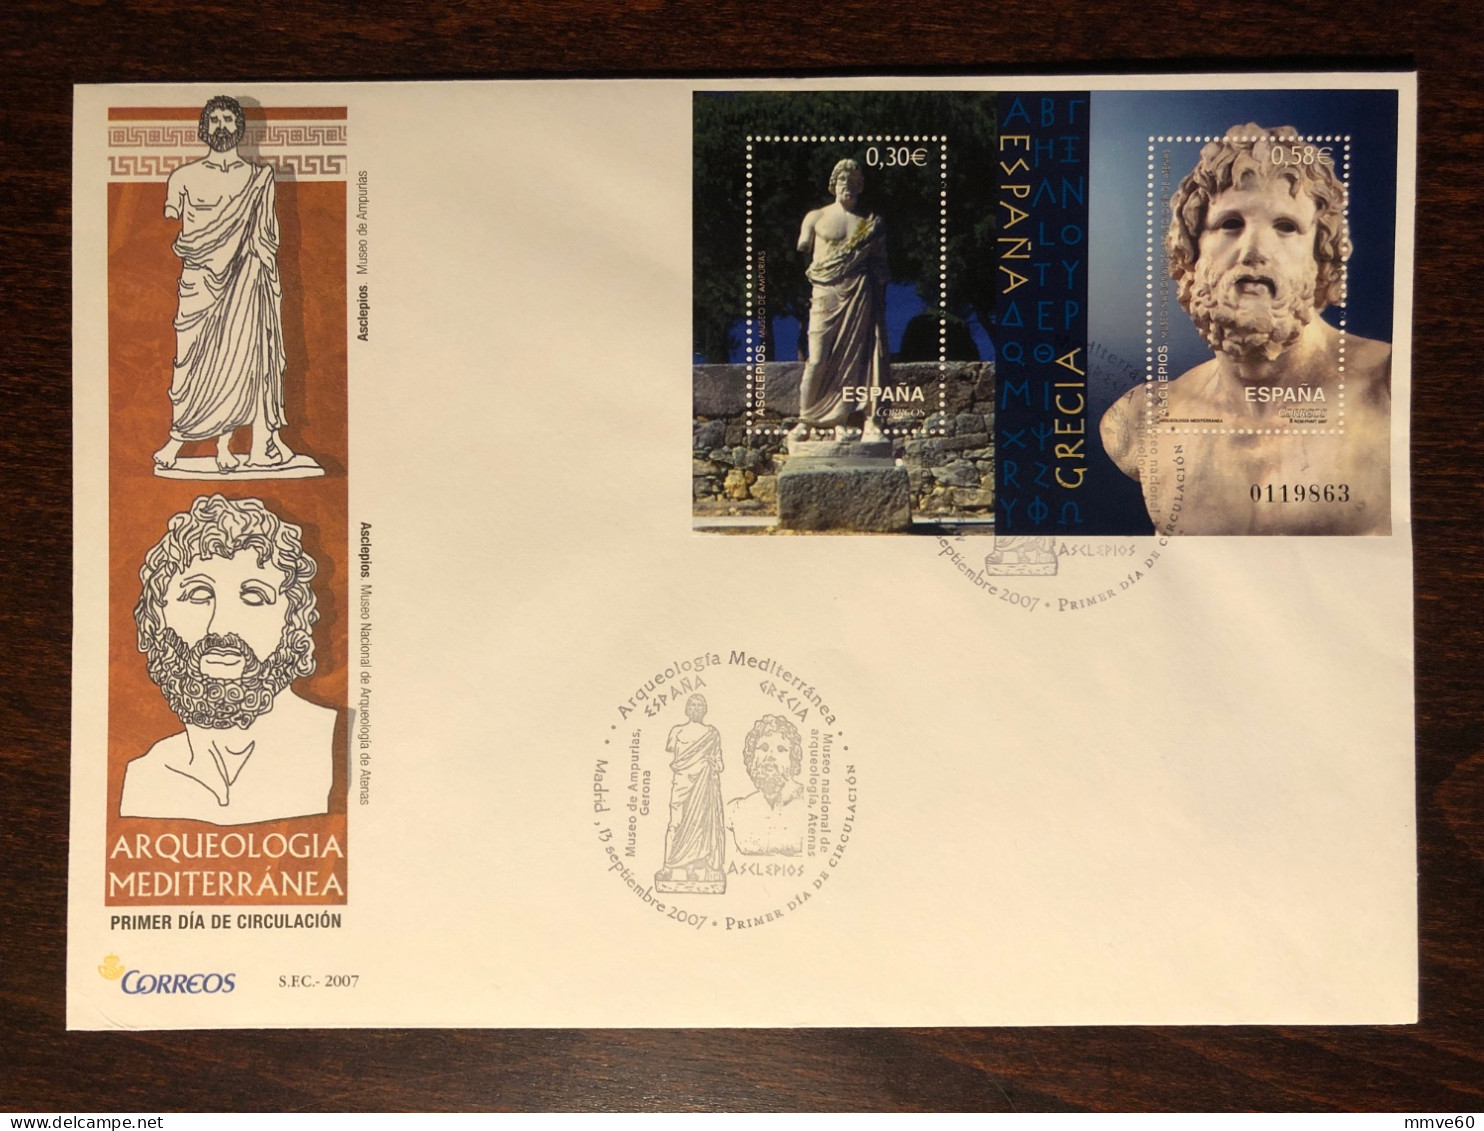 SPAIN FDC COVER 2007 YEAR ASCLEPIOS HISTORY OF MEDICINE HEALTH MEDICINE STAMPS - FDC